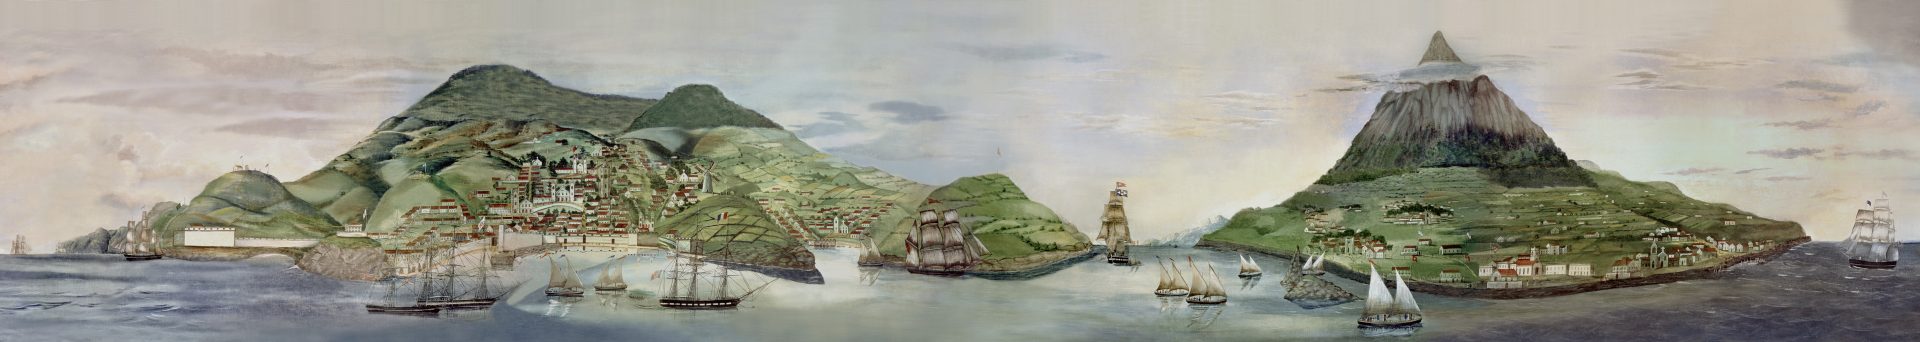 Benjamin Russell and Caleb Purrington, Grand Panorama of a Whaling Voyage ‘Round the World, 1848. (detail). Distemper on cotton sheeting, 1848. Gift of Benjamin Cummings. 1918.27.1.